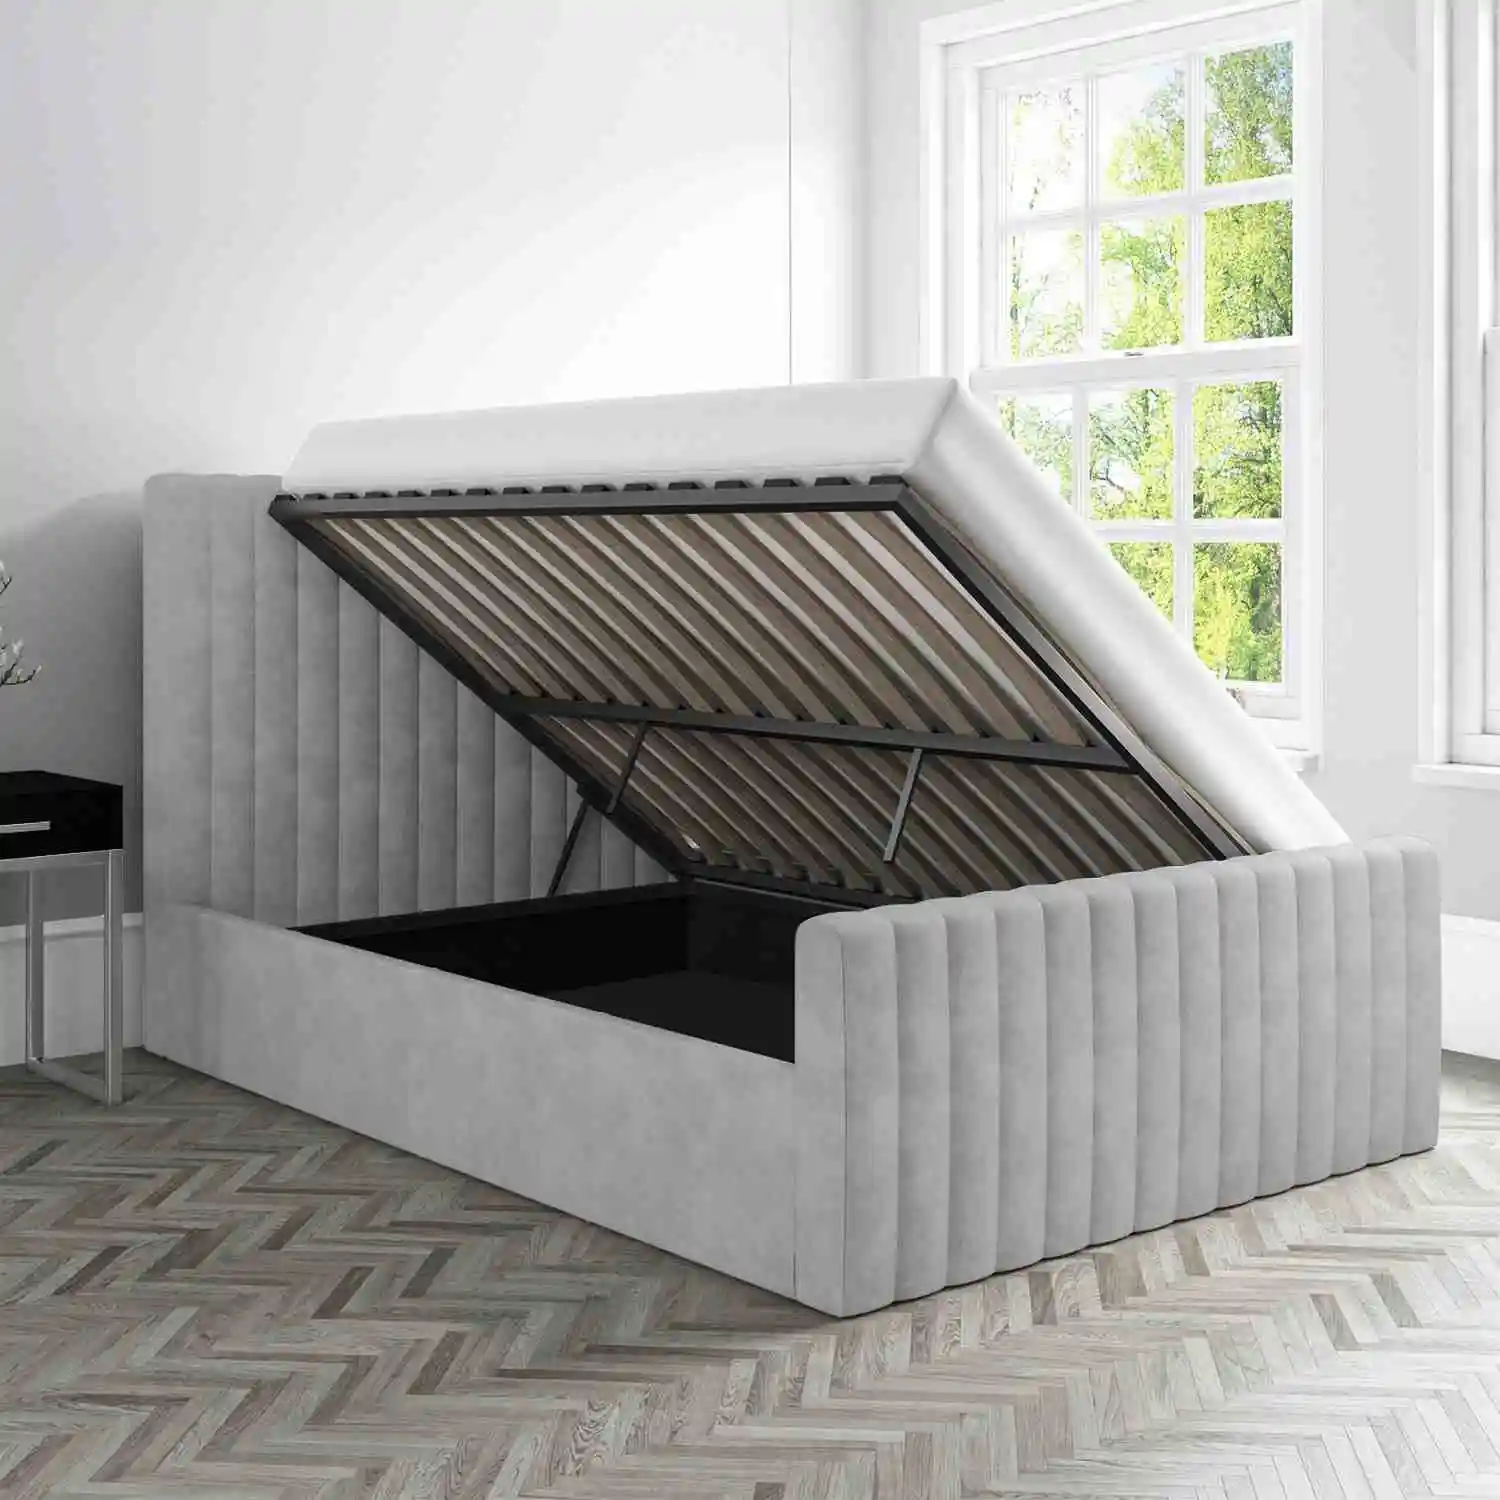 Identify Common Issues with Ottoman Beds